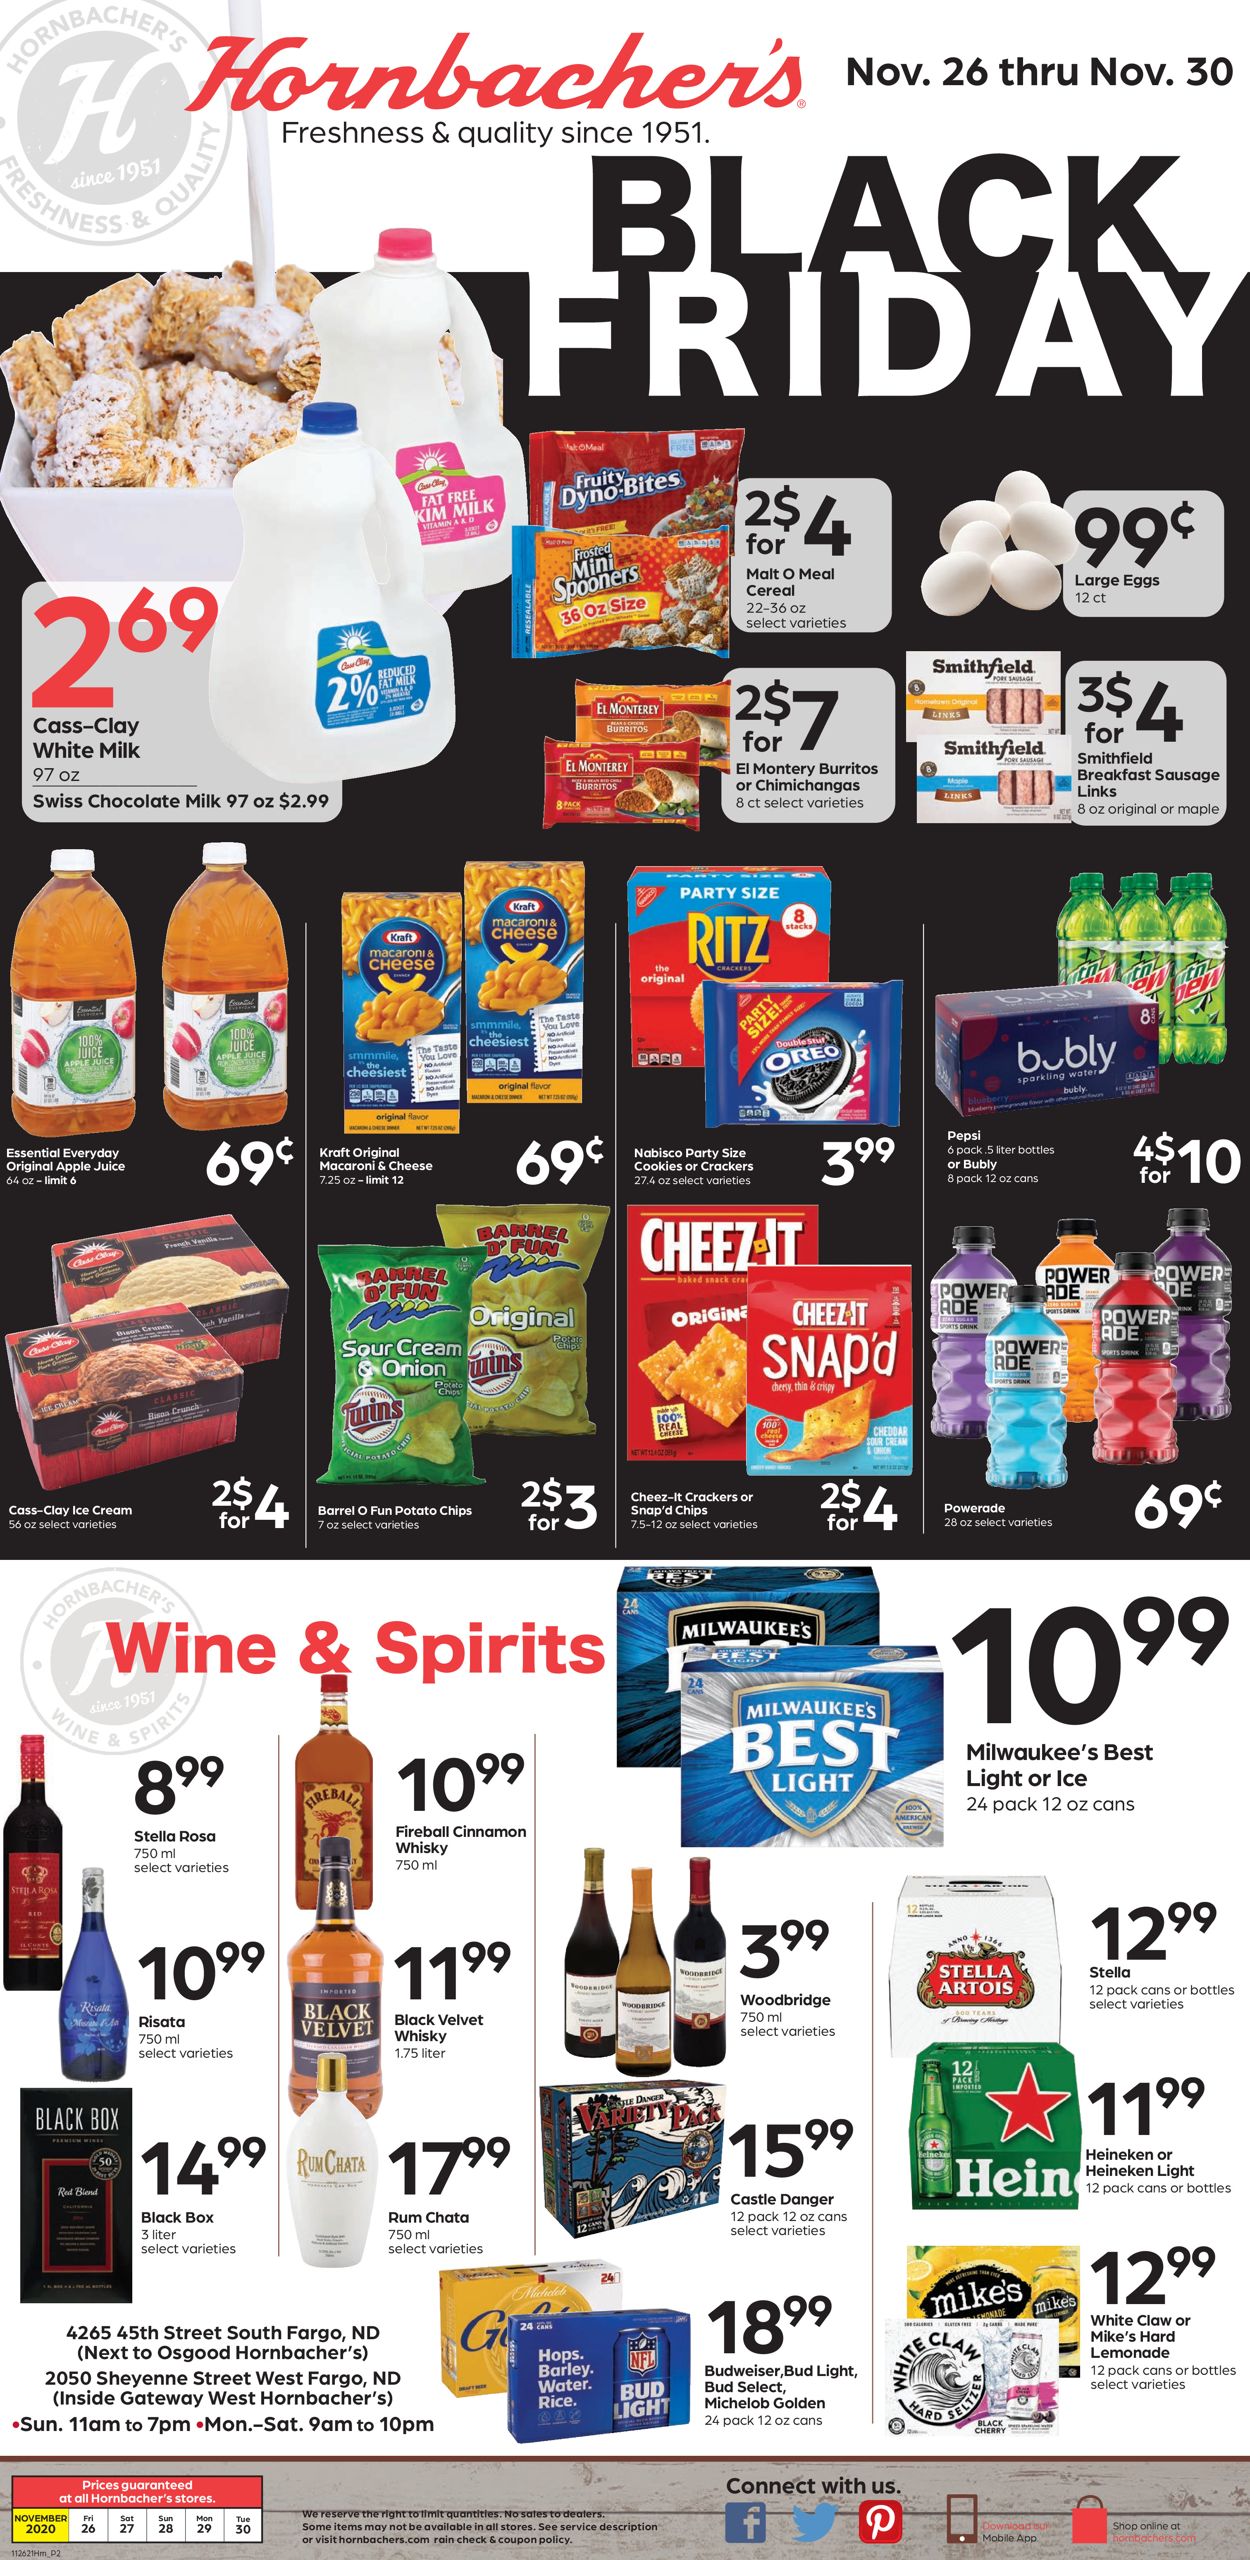 Hornbacher's BLACK FRIDAY 2021 Weekly Ad Circular - valid 11/26-11/30/2021 (Page 2)